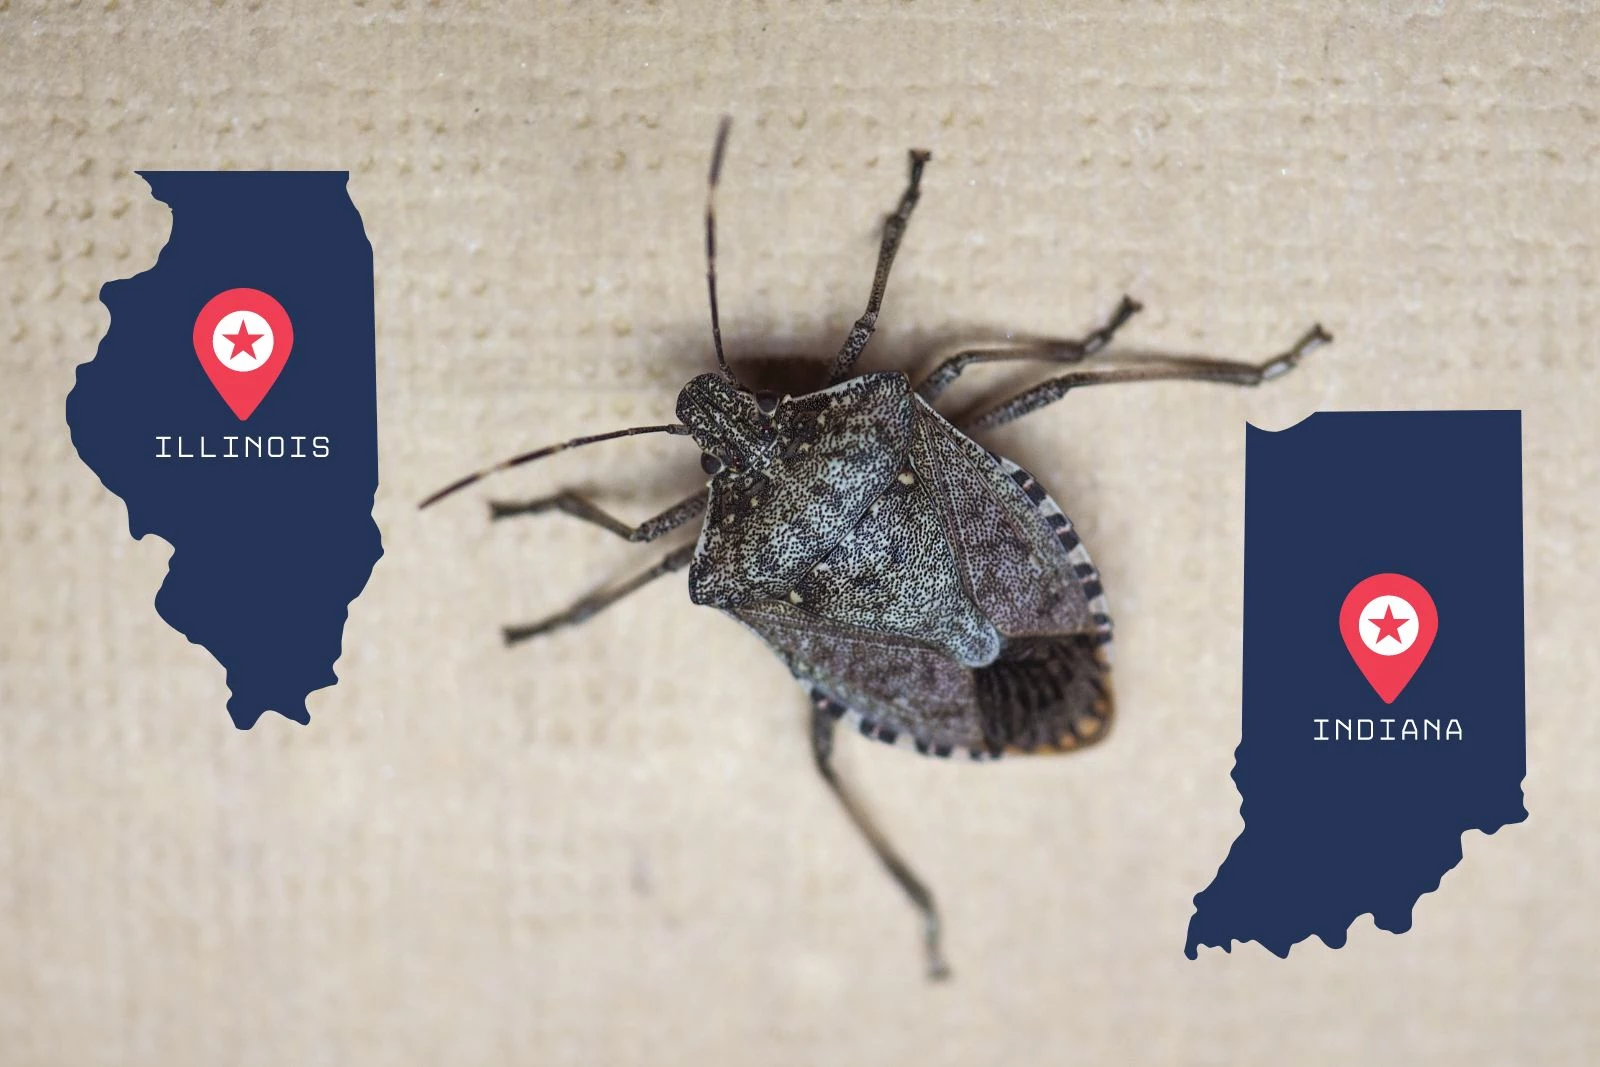 Invasive Stink Bug Population Expected to Increase in IL and IN